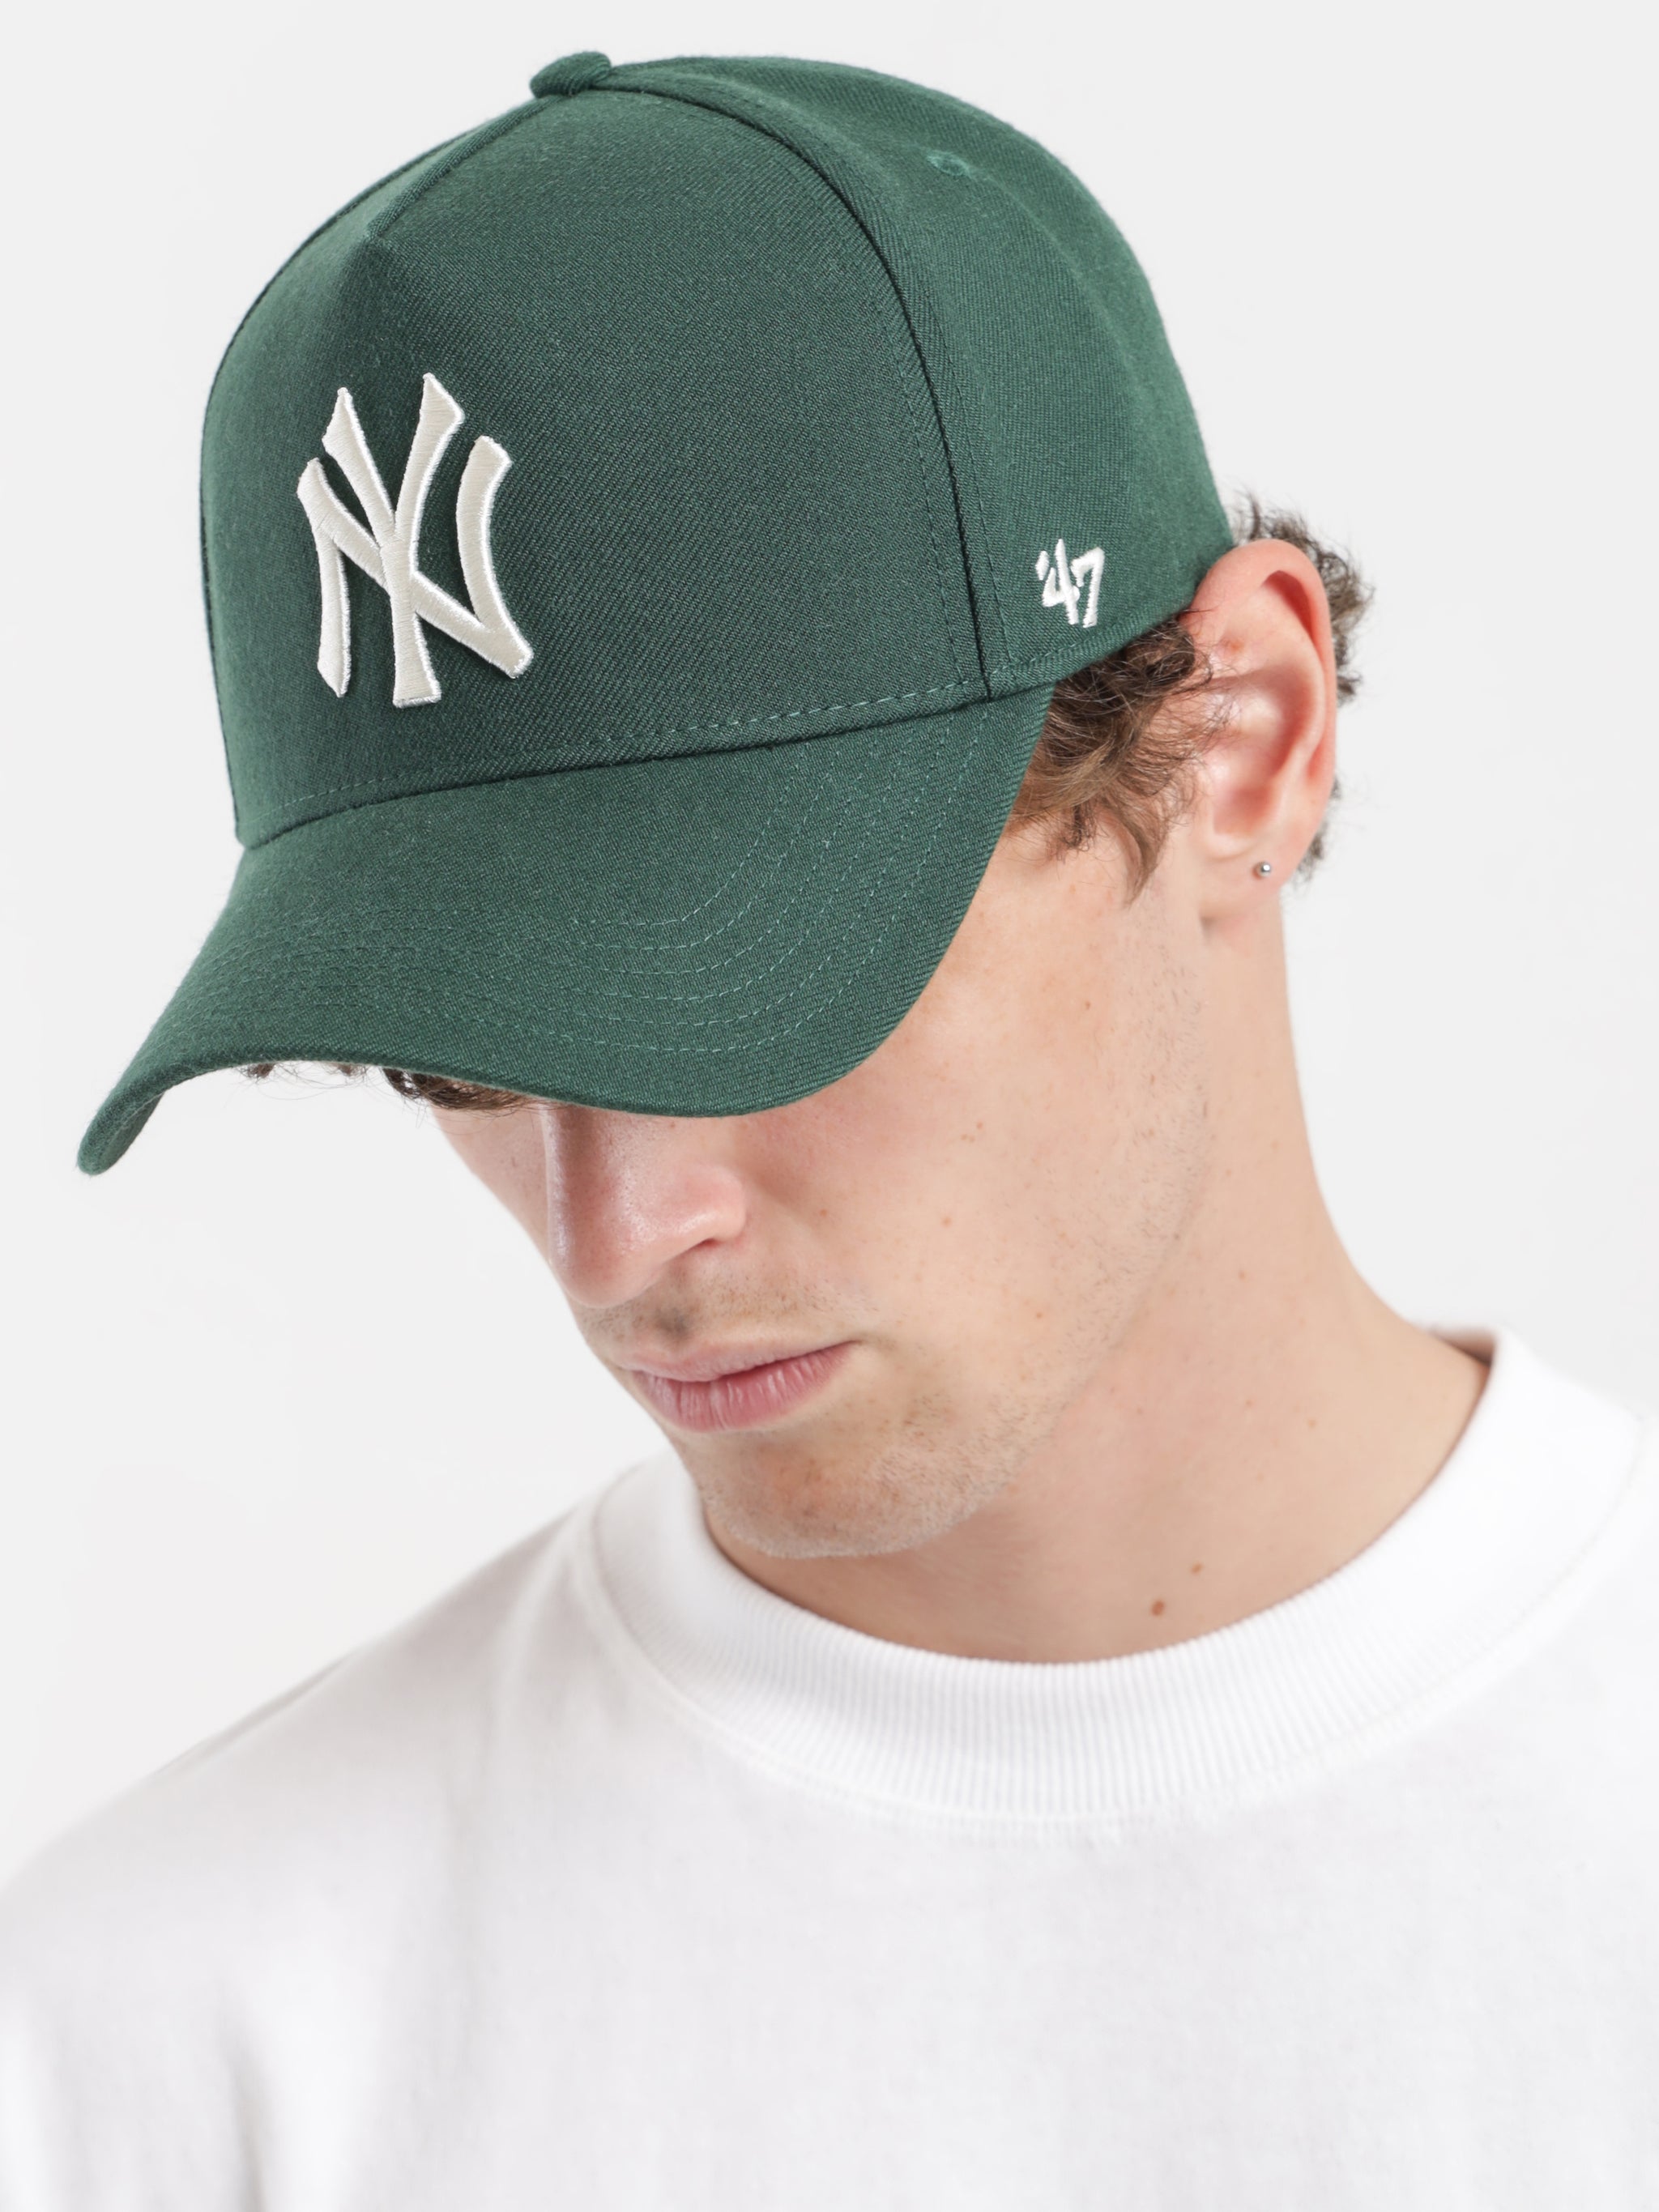 New Era  New York Yankees 9FORTY Cap  BlackWhite  Hats By The Hundred